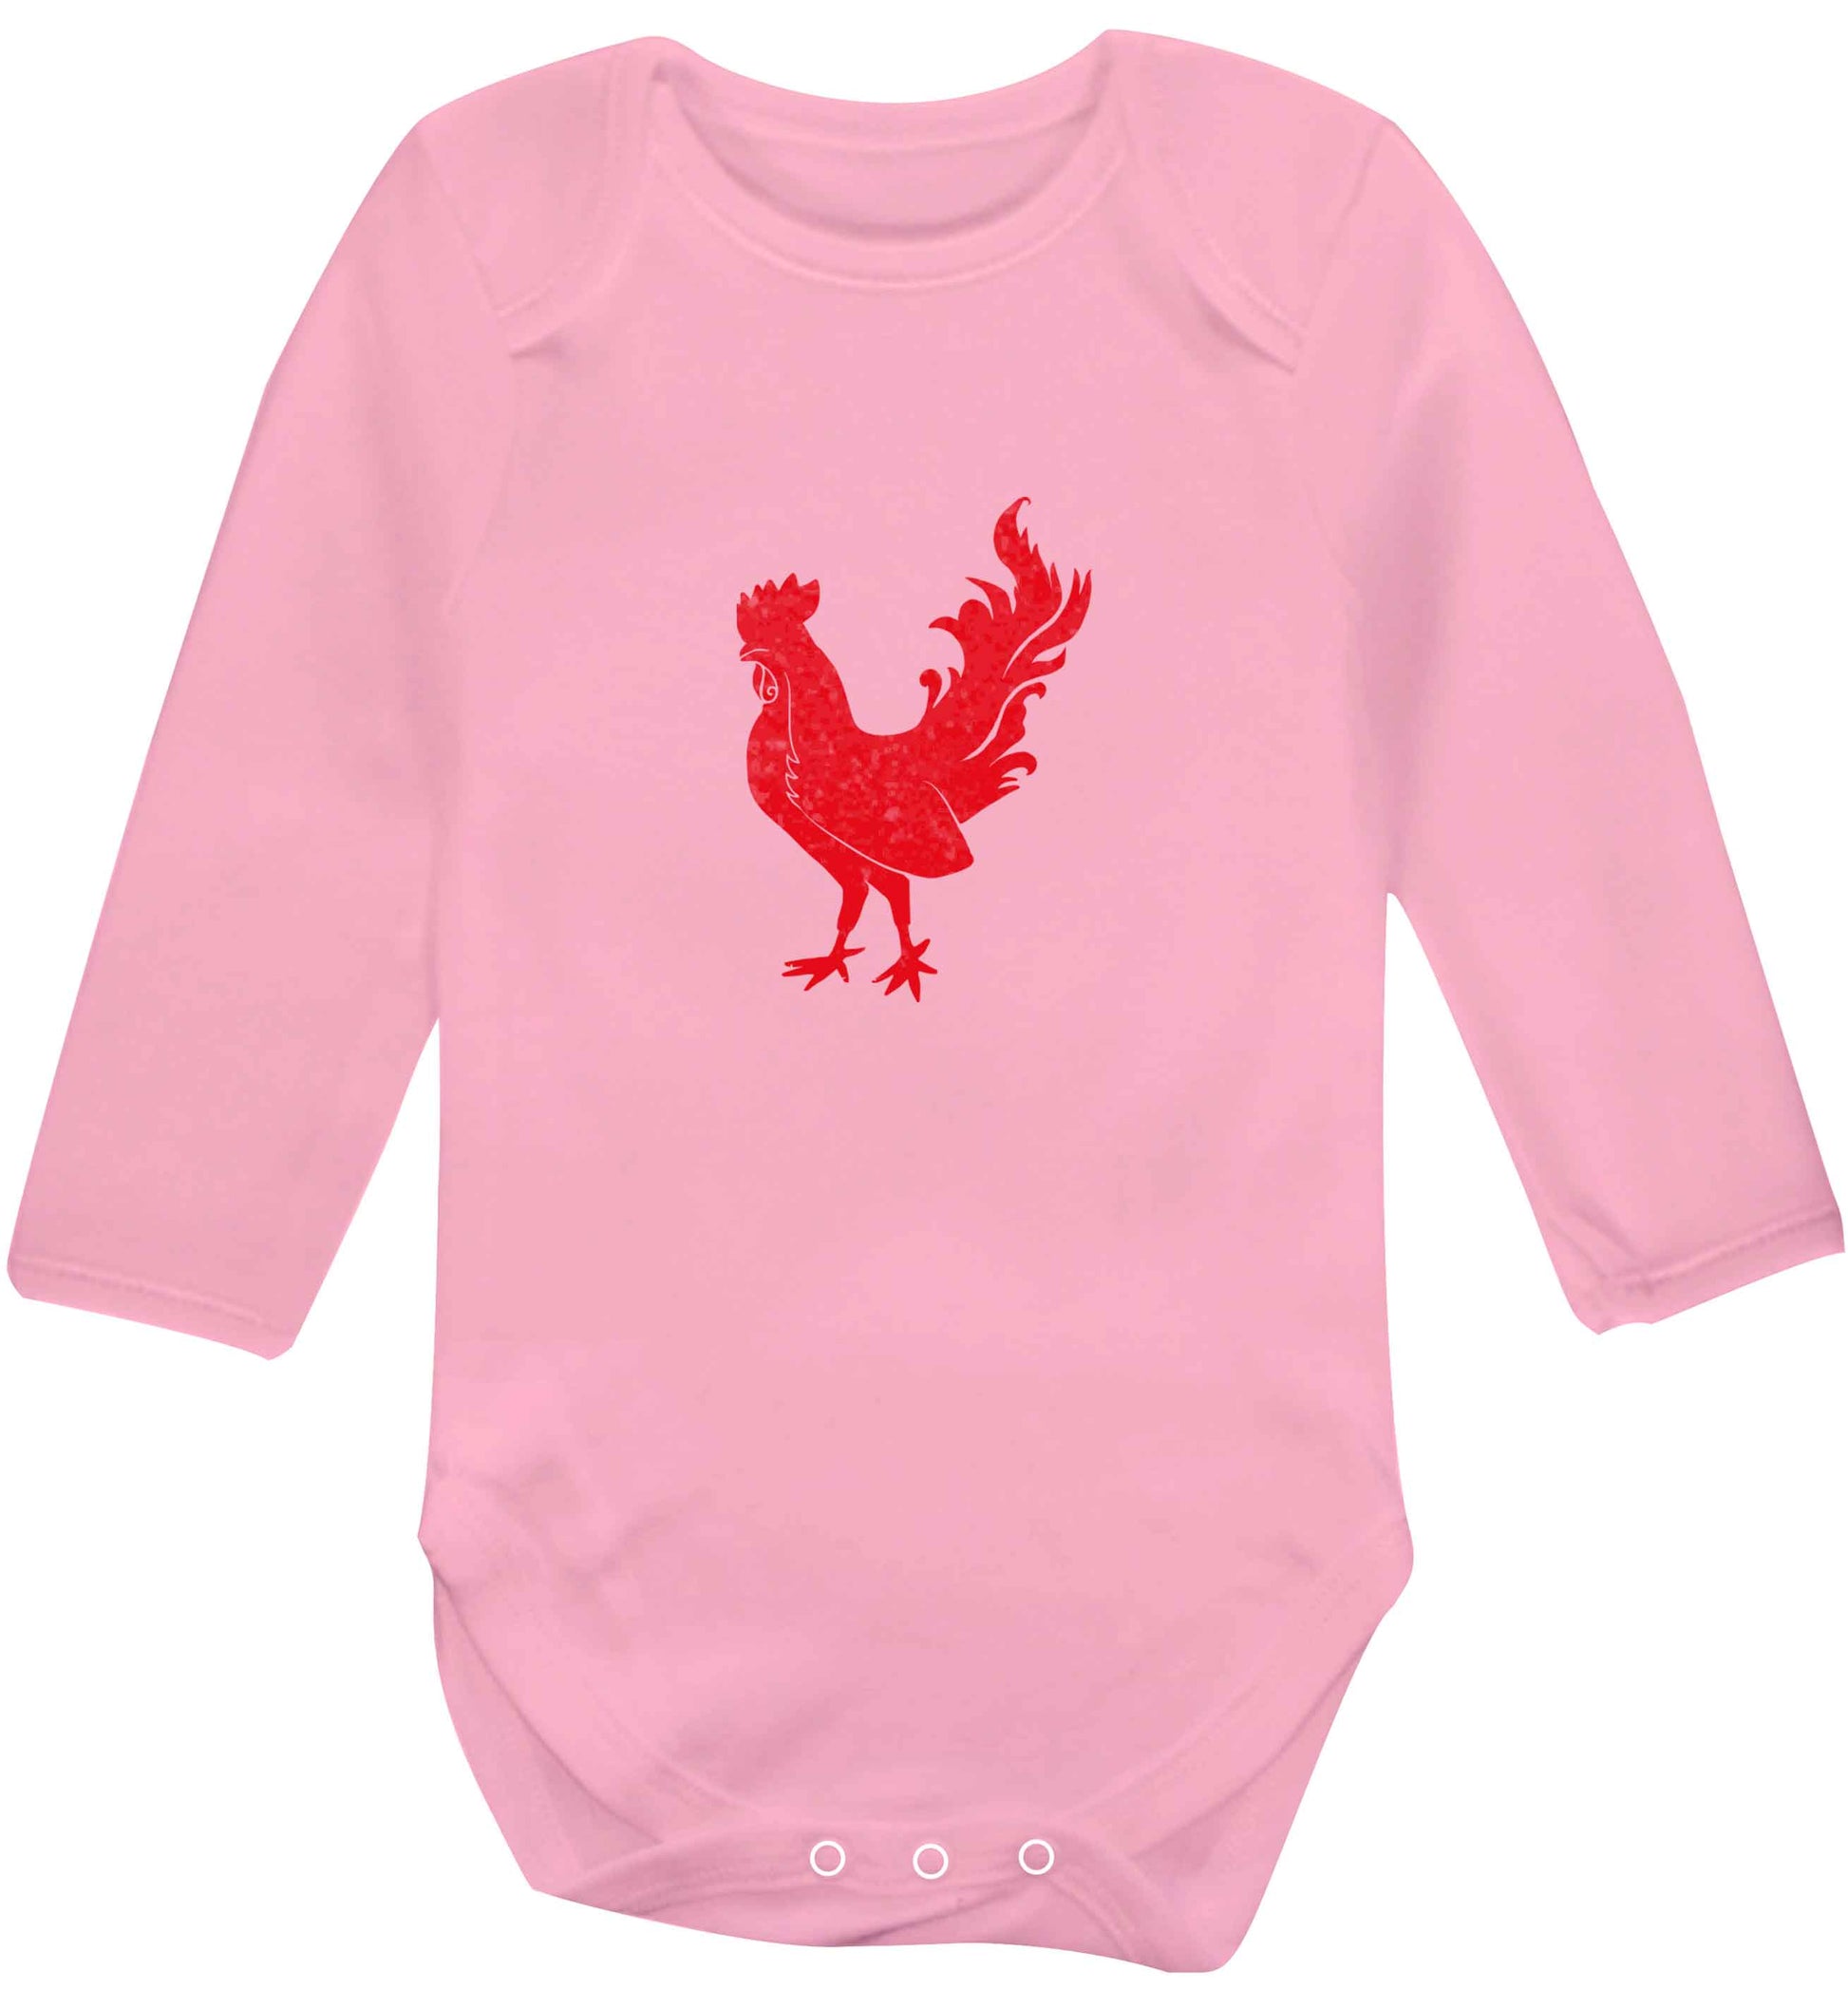 Rooster baby vest long sleeved pale pink 6-12 months